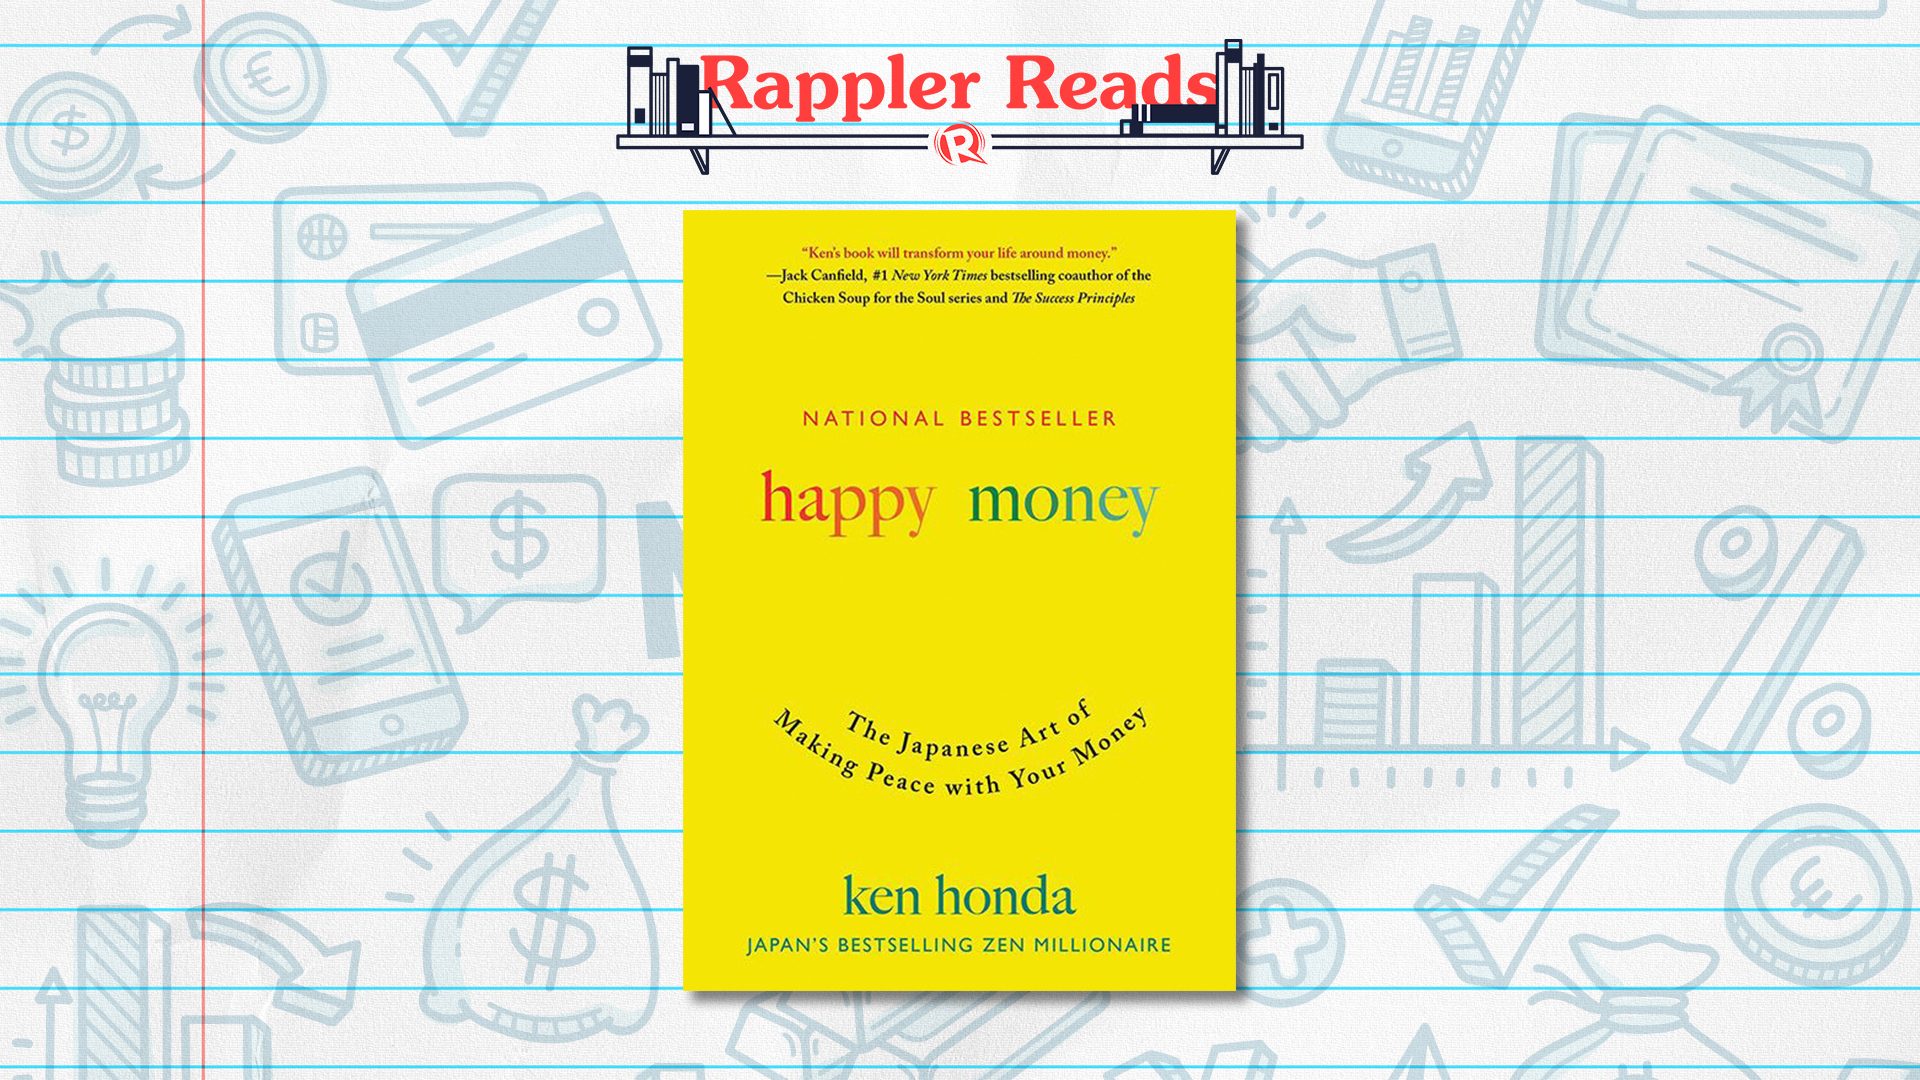 [#RapplerReads] ‘Happy Money’ didn’t really teach me about money management